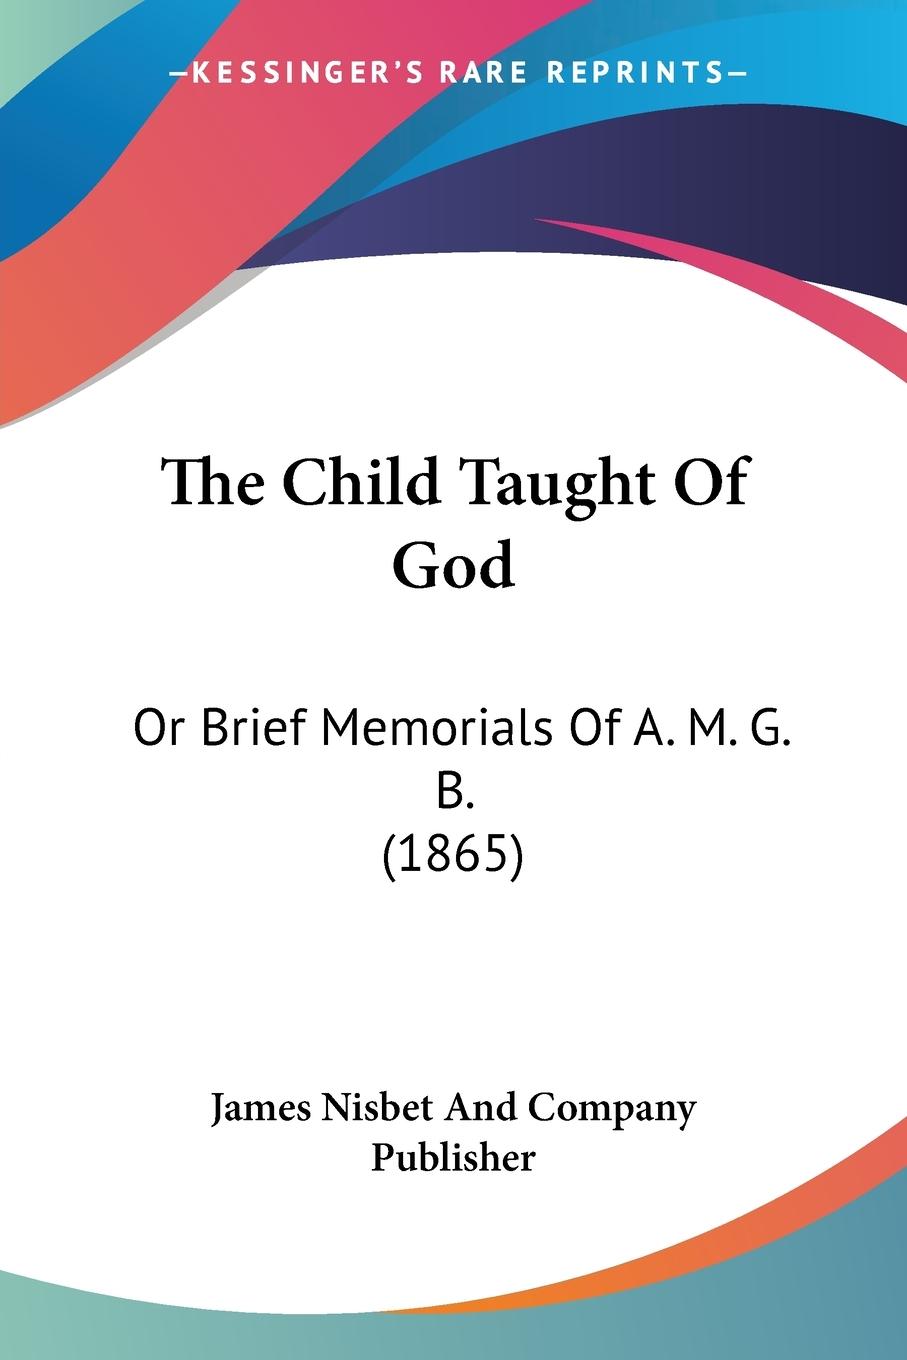 The Child Taught Of God - James Nisbet And Company Publisher